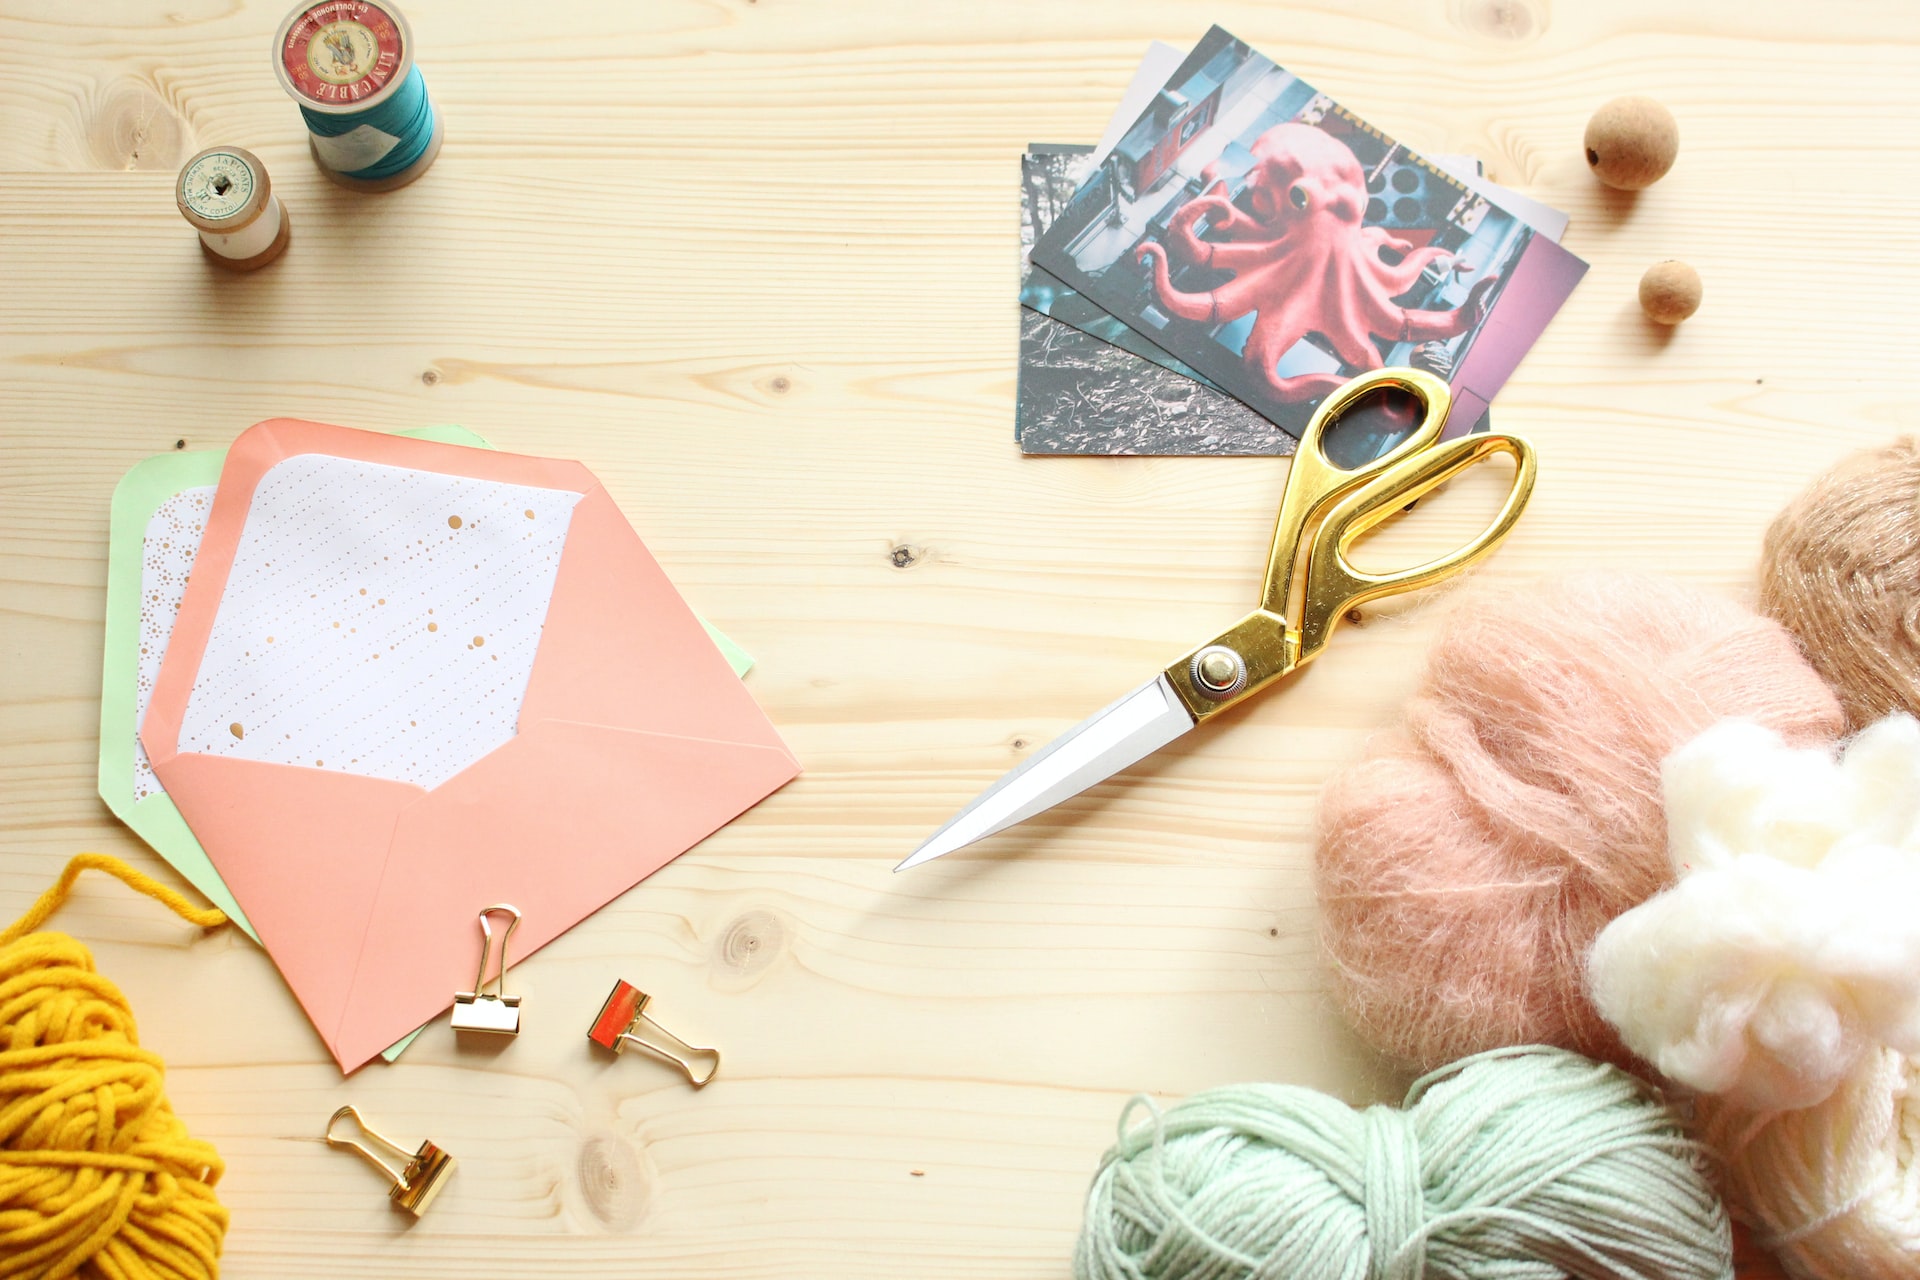 Pinterest for Crafters: A Guide to Finding Crafting Resources and Inspiration